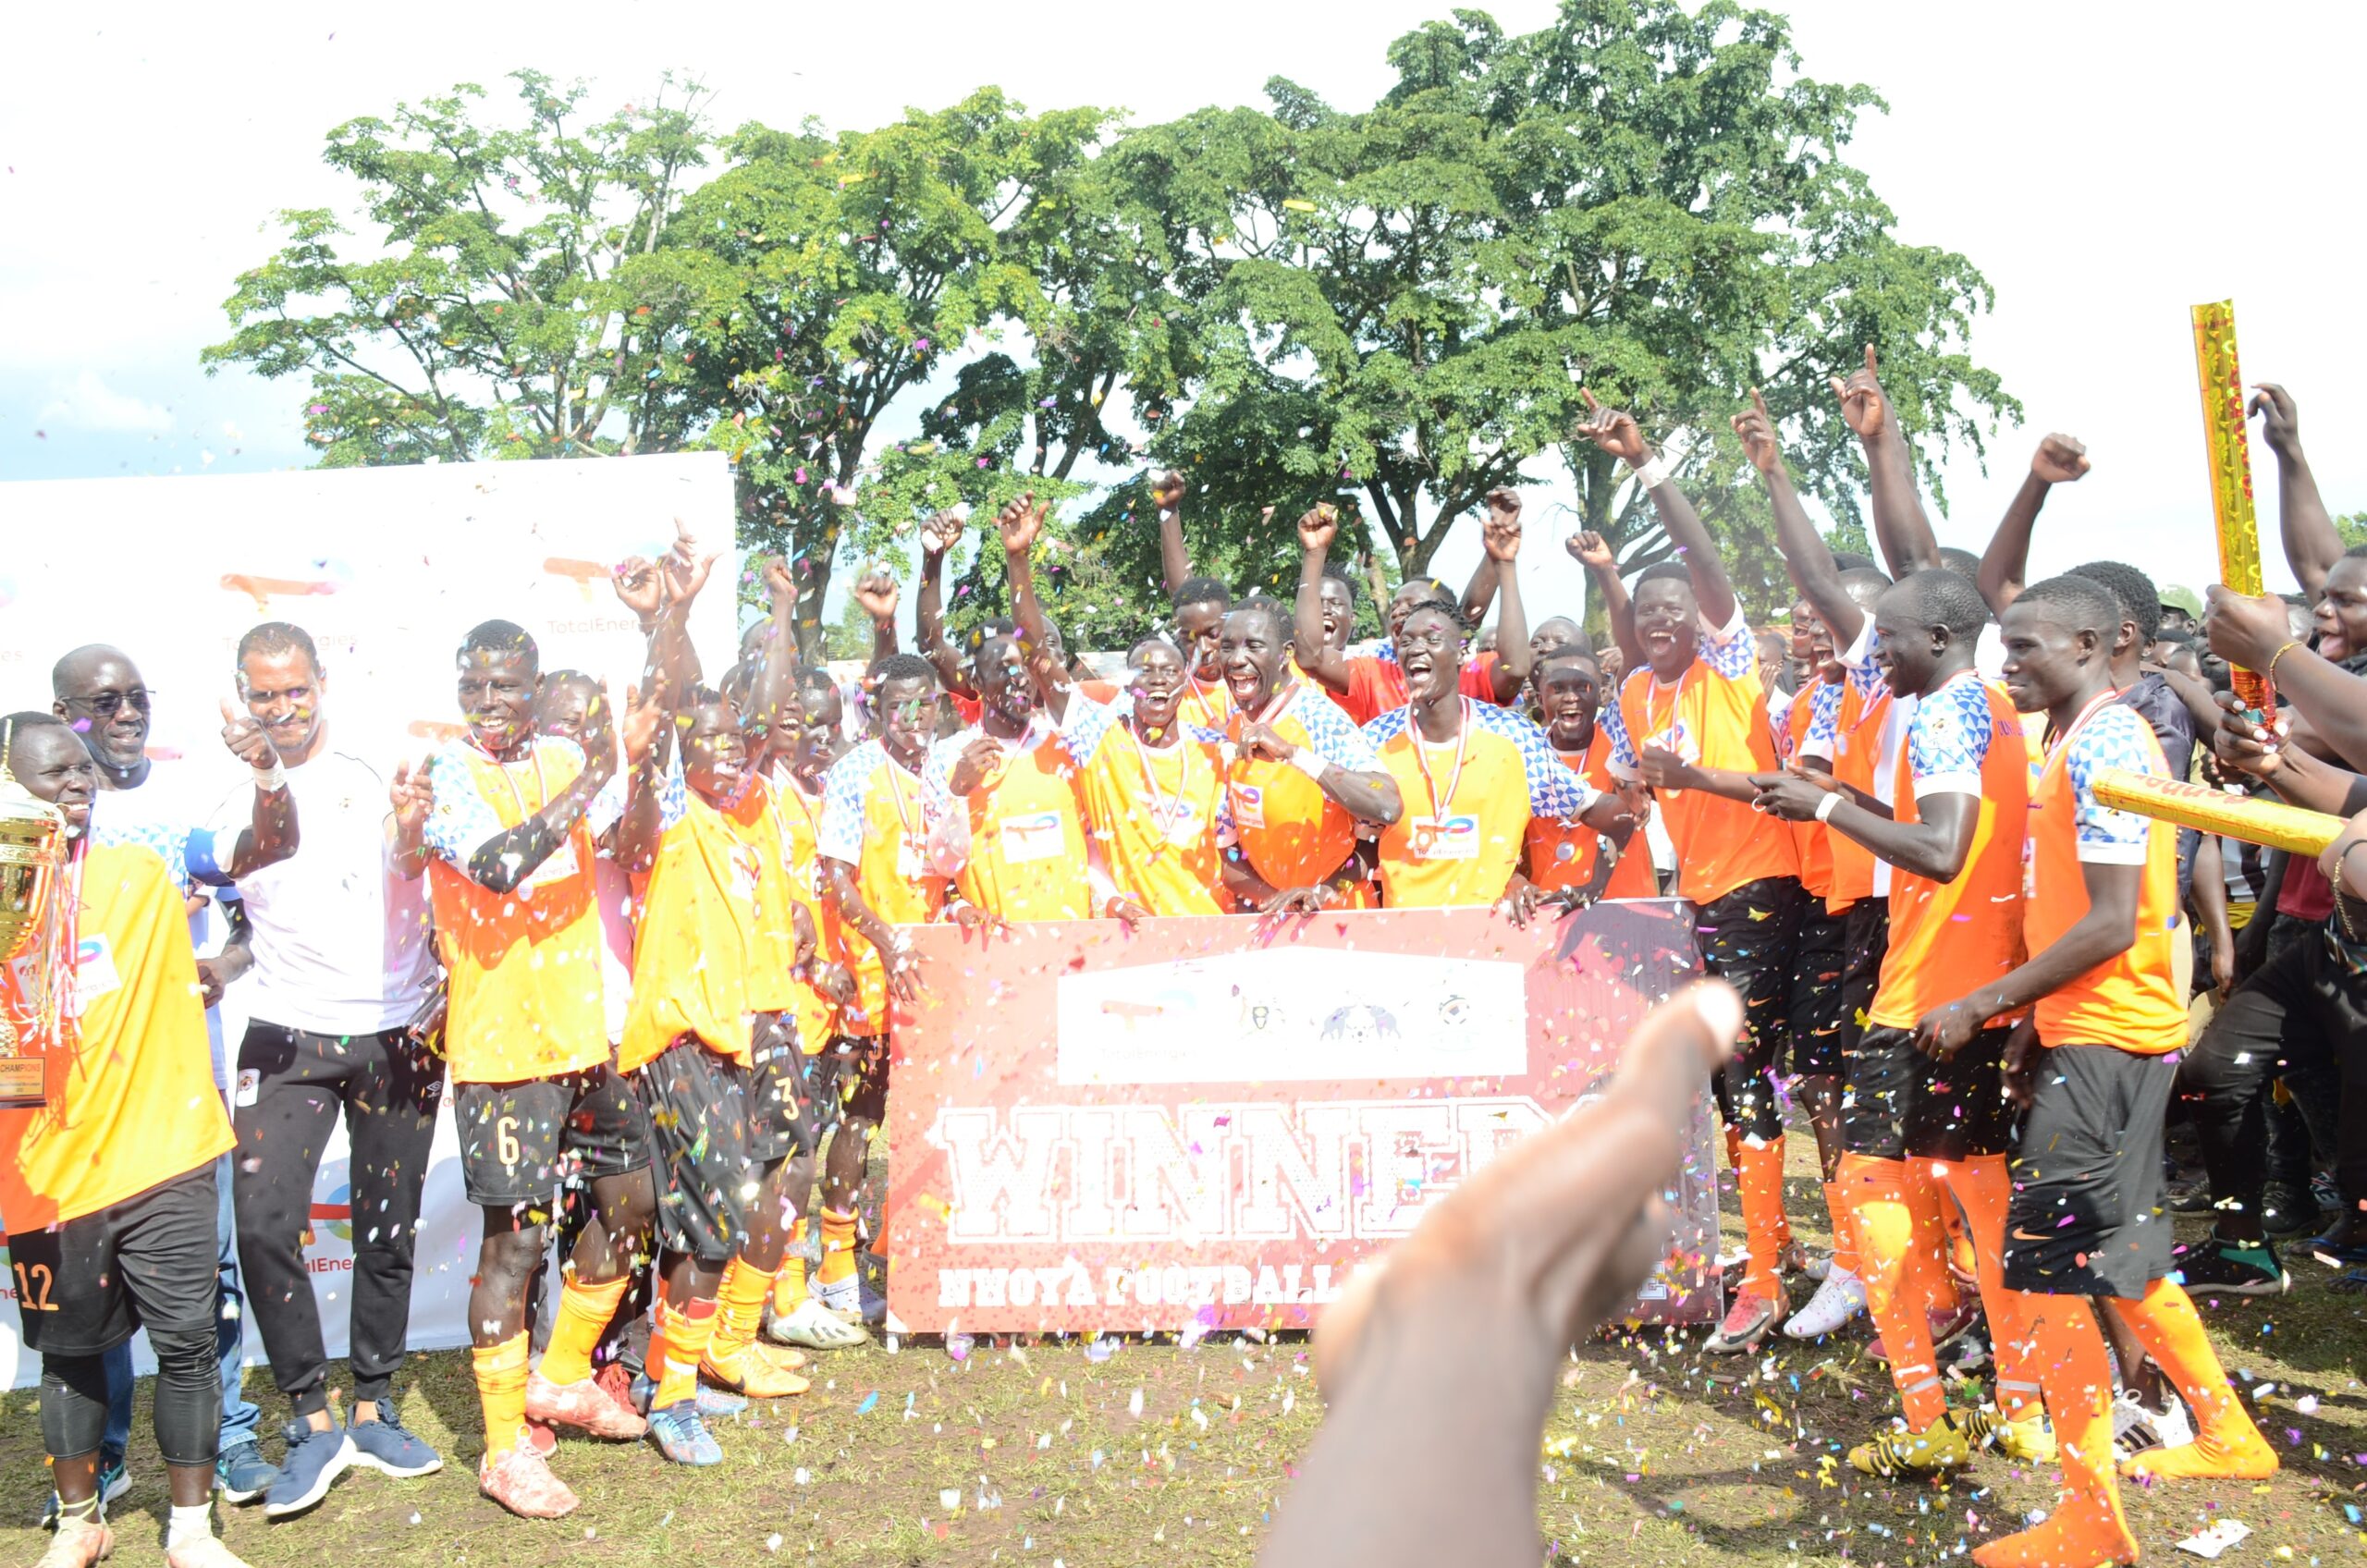 Young Elephant FC players celebrating after beating Black Black Tiger Wilacic FC at Anaka Primary school playground in Nwoya district on Saturday.